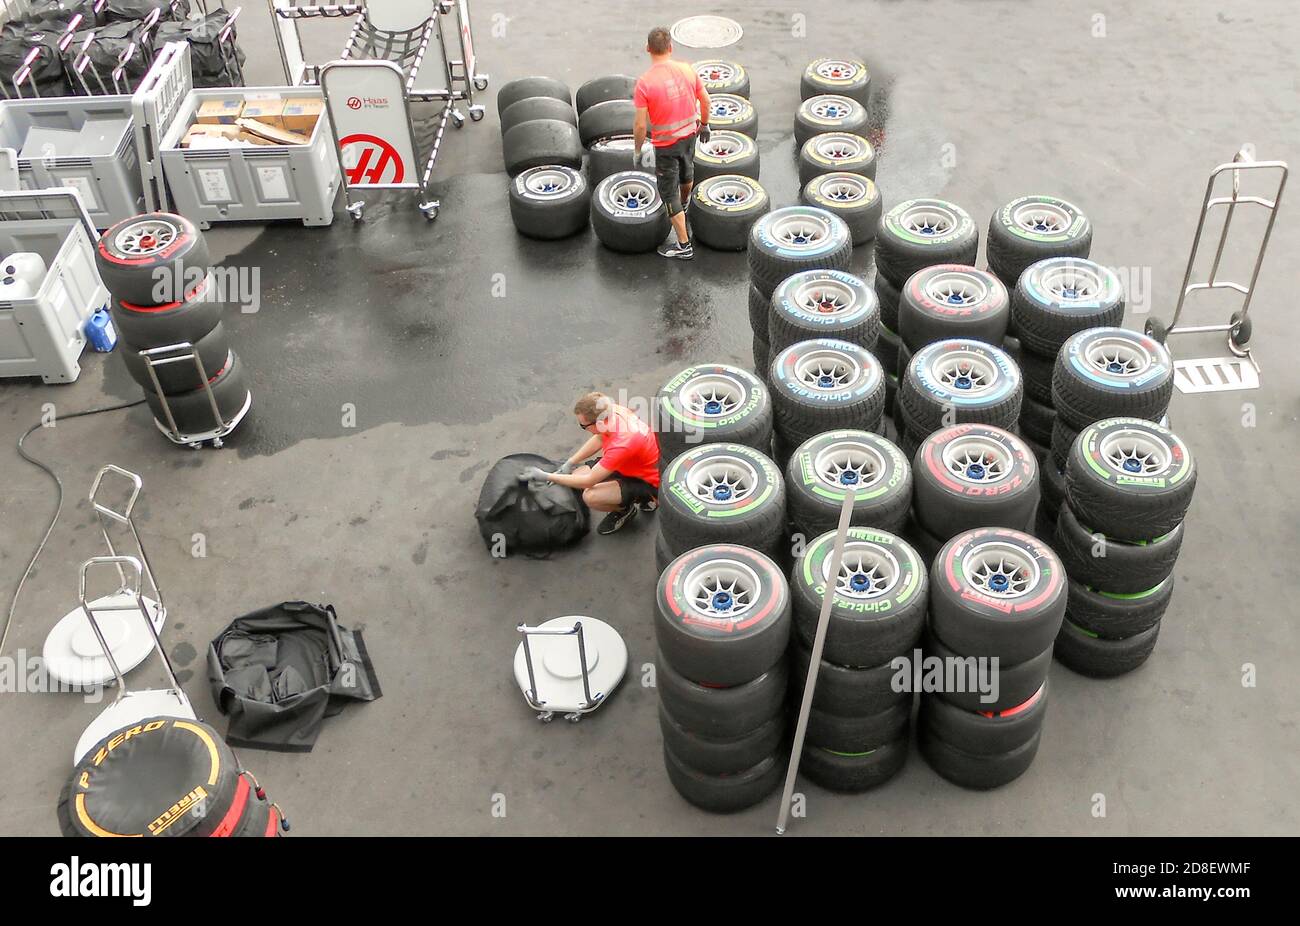 Support team prepares tyres before a Formula One Race Stock Photo